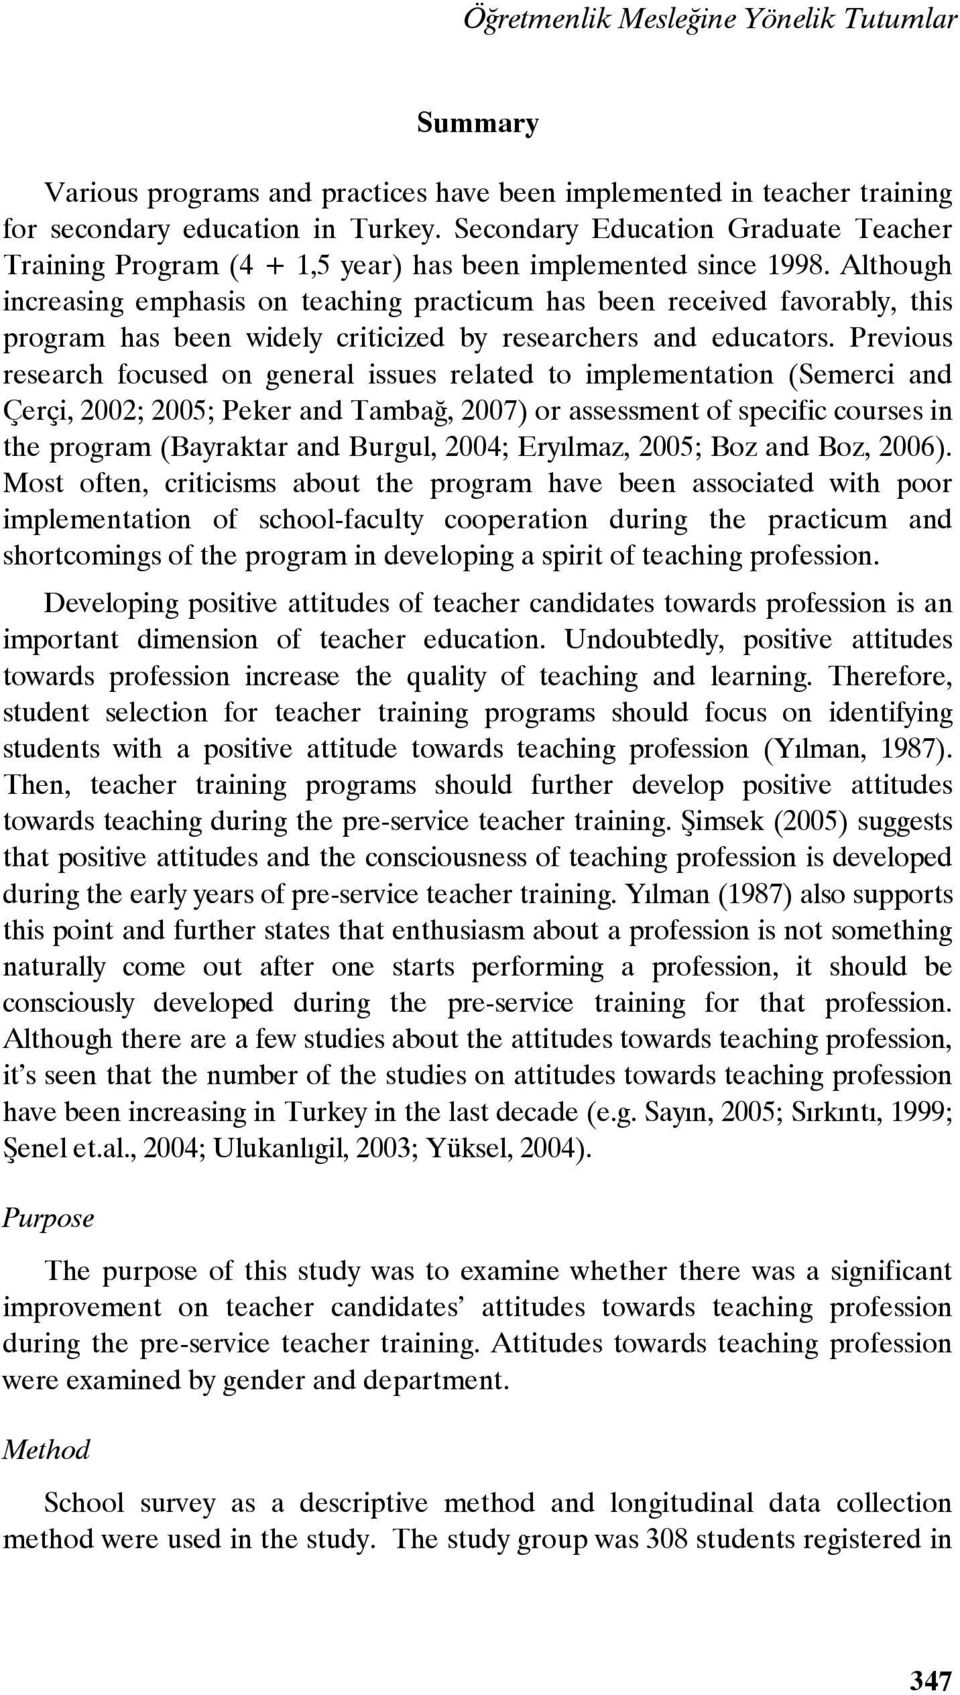 Although increasing emphasis on teaching practicum has been received favorably, this program has been widely criticized by researchers and educators.